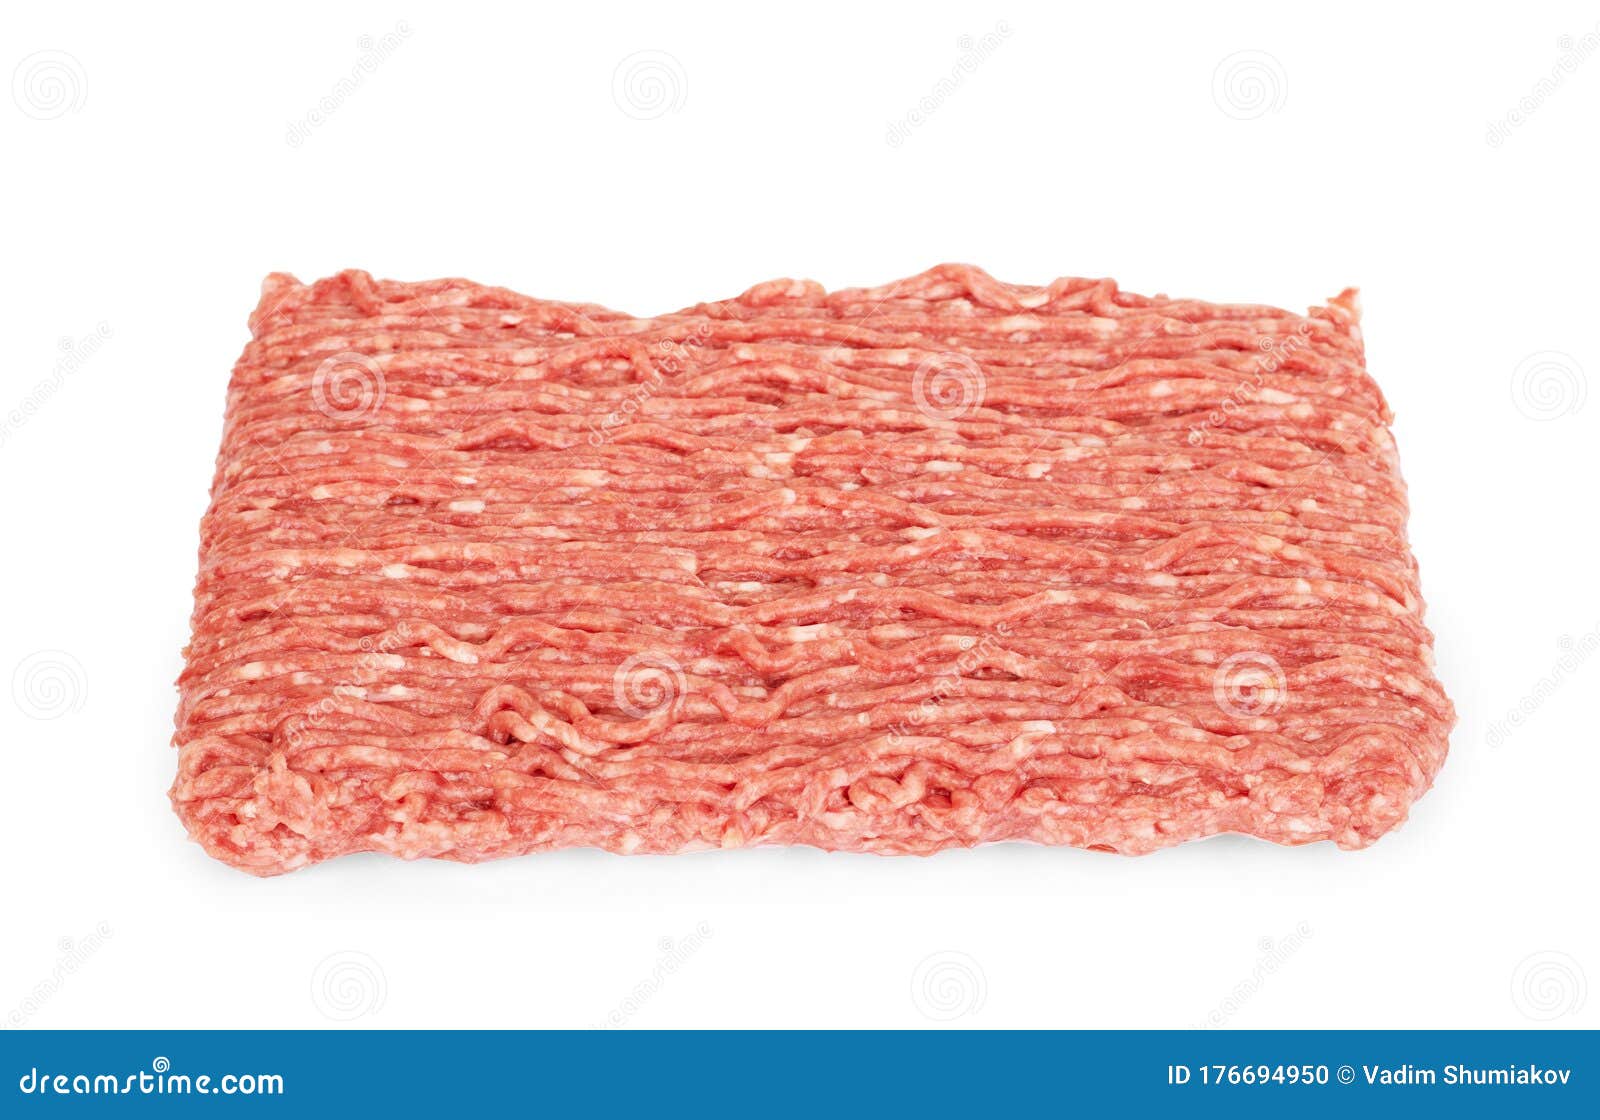 minced meat, pork, beef, forcemeat, clipping path,  on white background, full depth of field